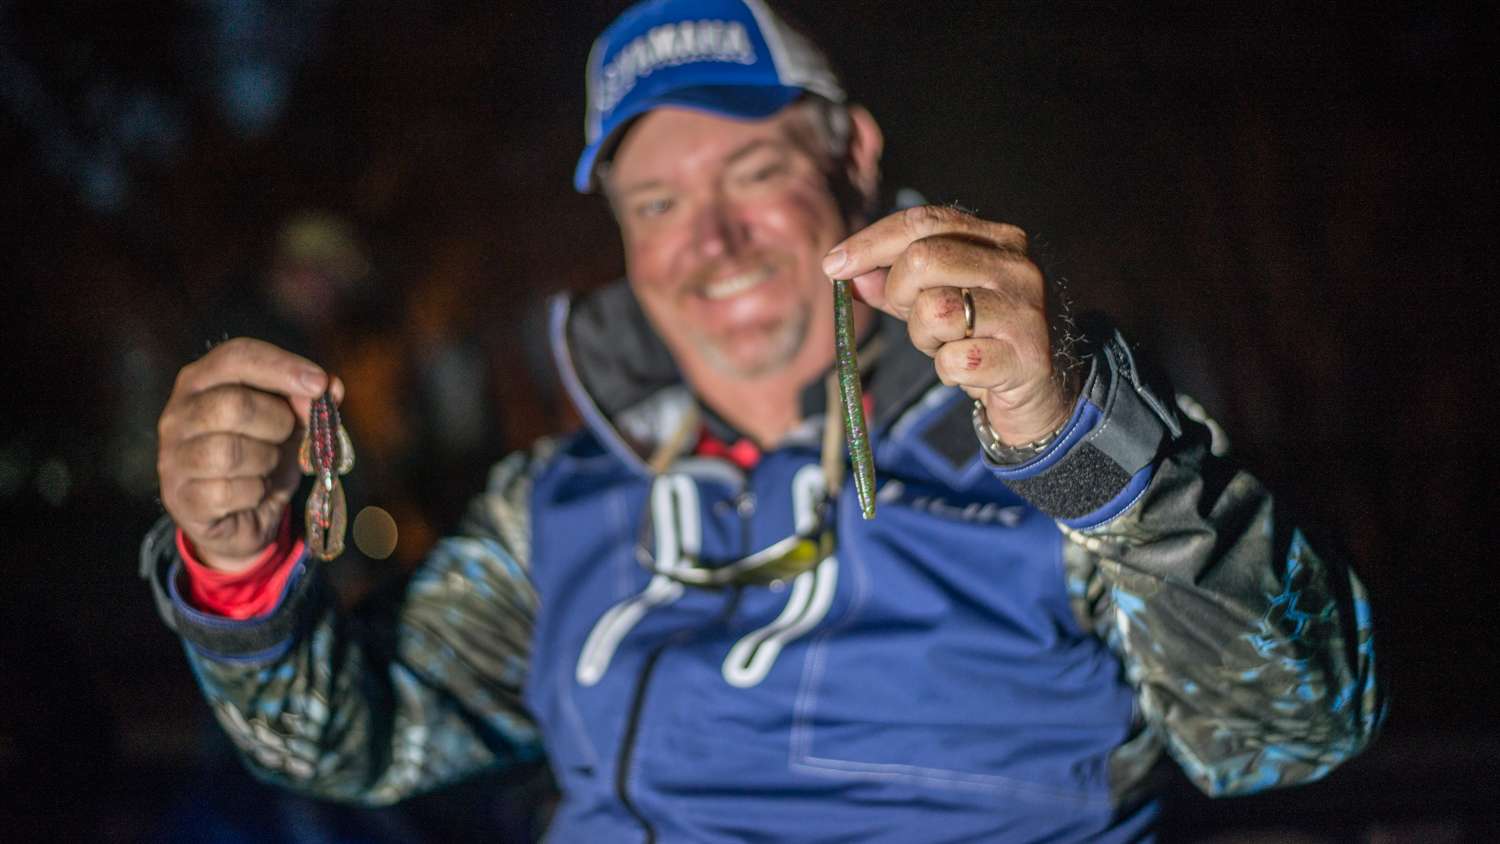 <b>Mark Davis</b><br>
The 1995 Bassmaster Classic champion found success using a tandem selection of baits to finish 8th place. For smallmouth he fished behind the current breaks created by wing dams with a Strike King 5-inch KVD Ocho, Candy Craw. He Texas rigged it with a 4/0 offset worm hook. For largemouth he used a 4-inch Strike King Rage Bug, California Craw. Davis made a Texas rig using a 3/0 offset worm hook. The edges of thick vegetation were lure targets. For both rigs he used a 3/16-ounce Strike King Tour Grade Tungsten Weight.